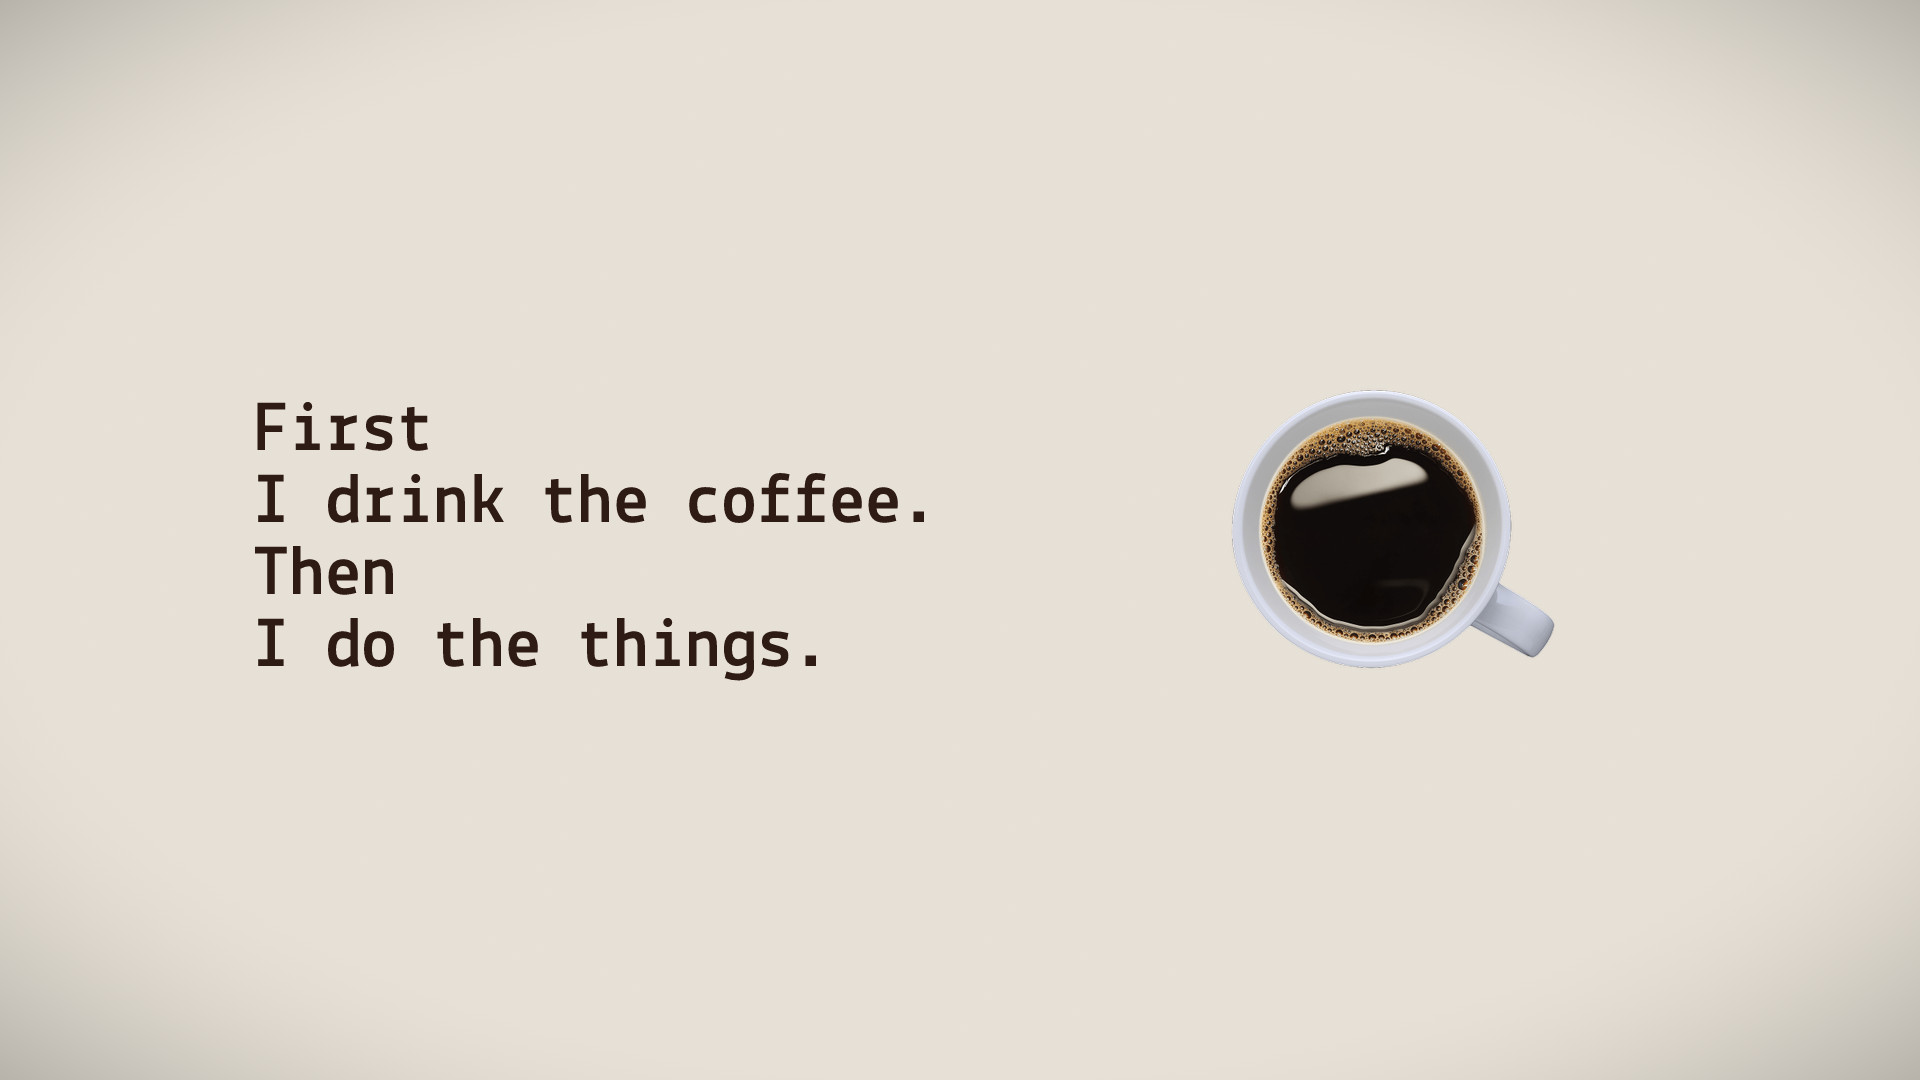 First, I drink the coffee, then I do the things.